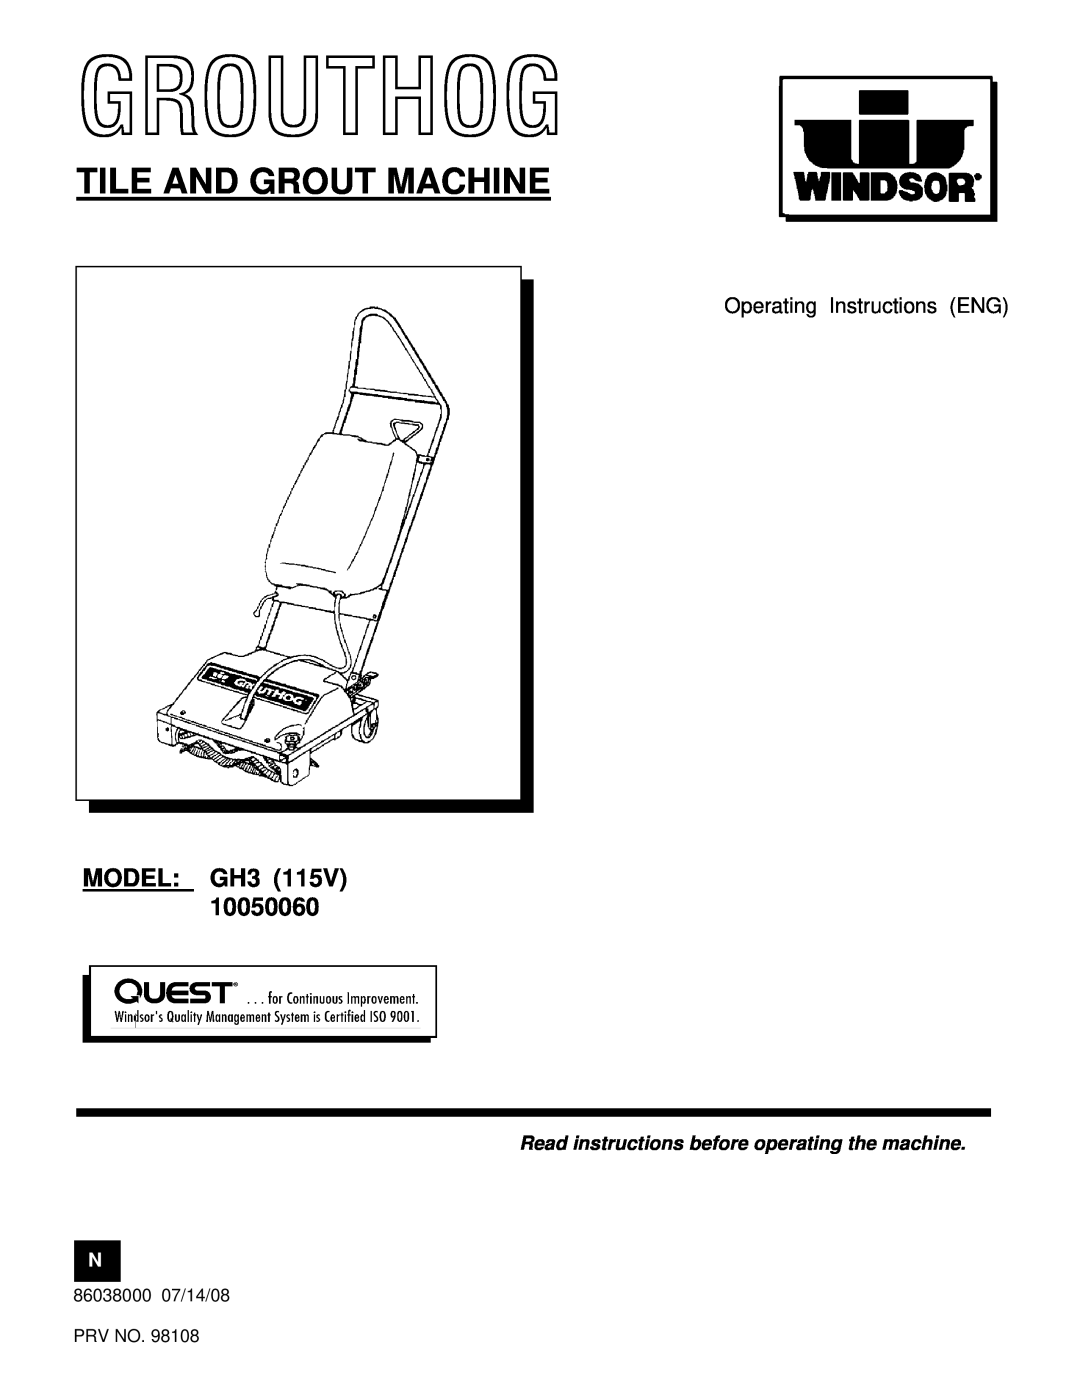 Windsor manual Tile And Grout Machine, Operating Instructions ENG, Grouthog, MODEL GH3 